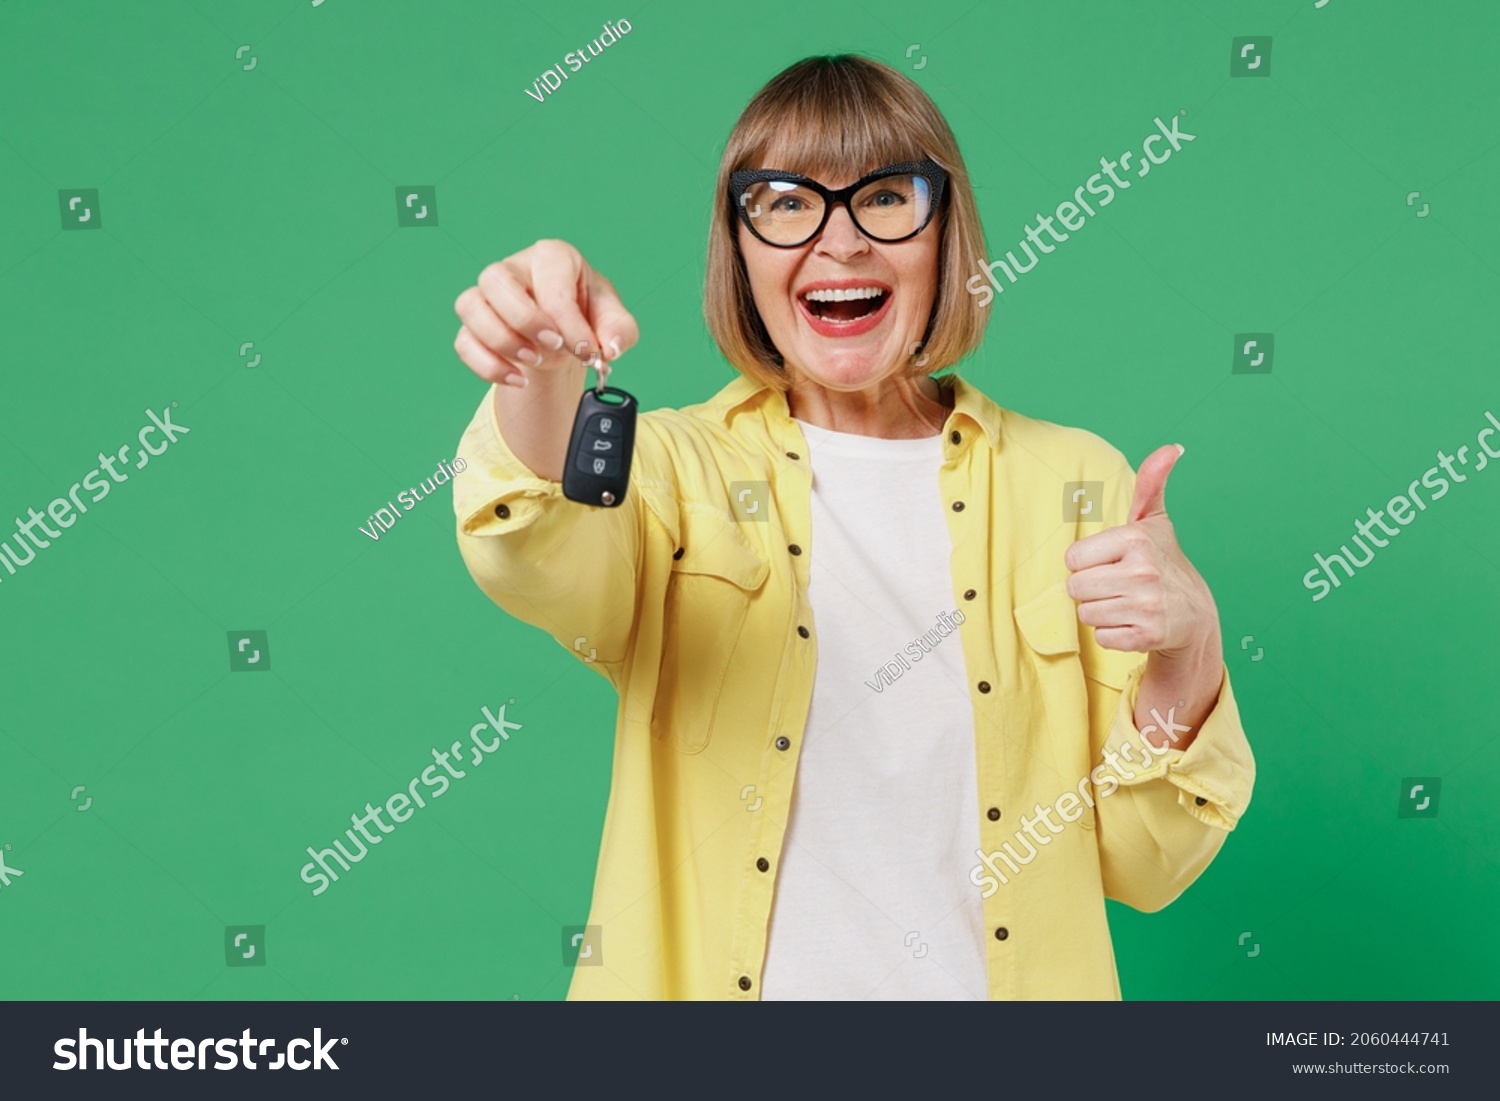 Elderly smiling happy caucasian woman 50s in glasses yellow shirt hold car keys fob keyless system show thumb up gesture isolated on plain green background studio portrait People lifestyle concept. #2060444741